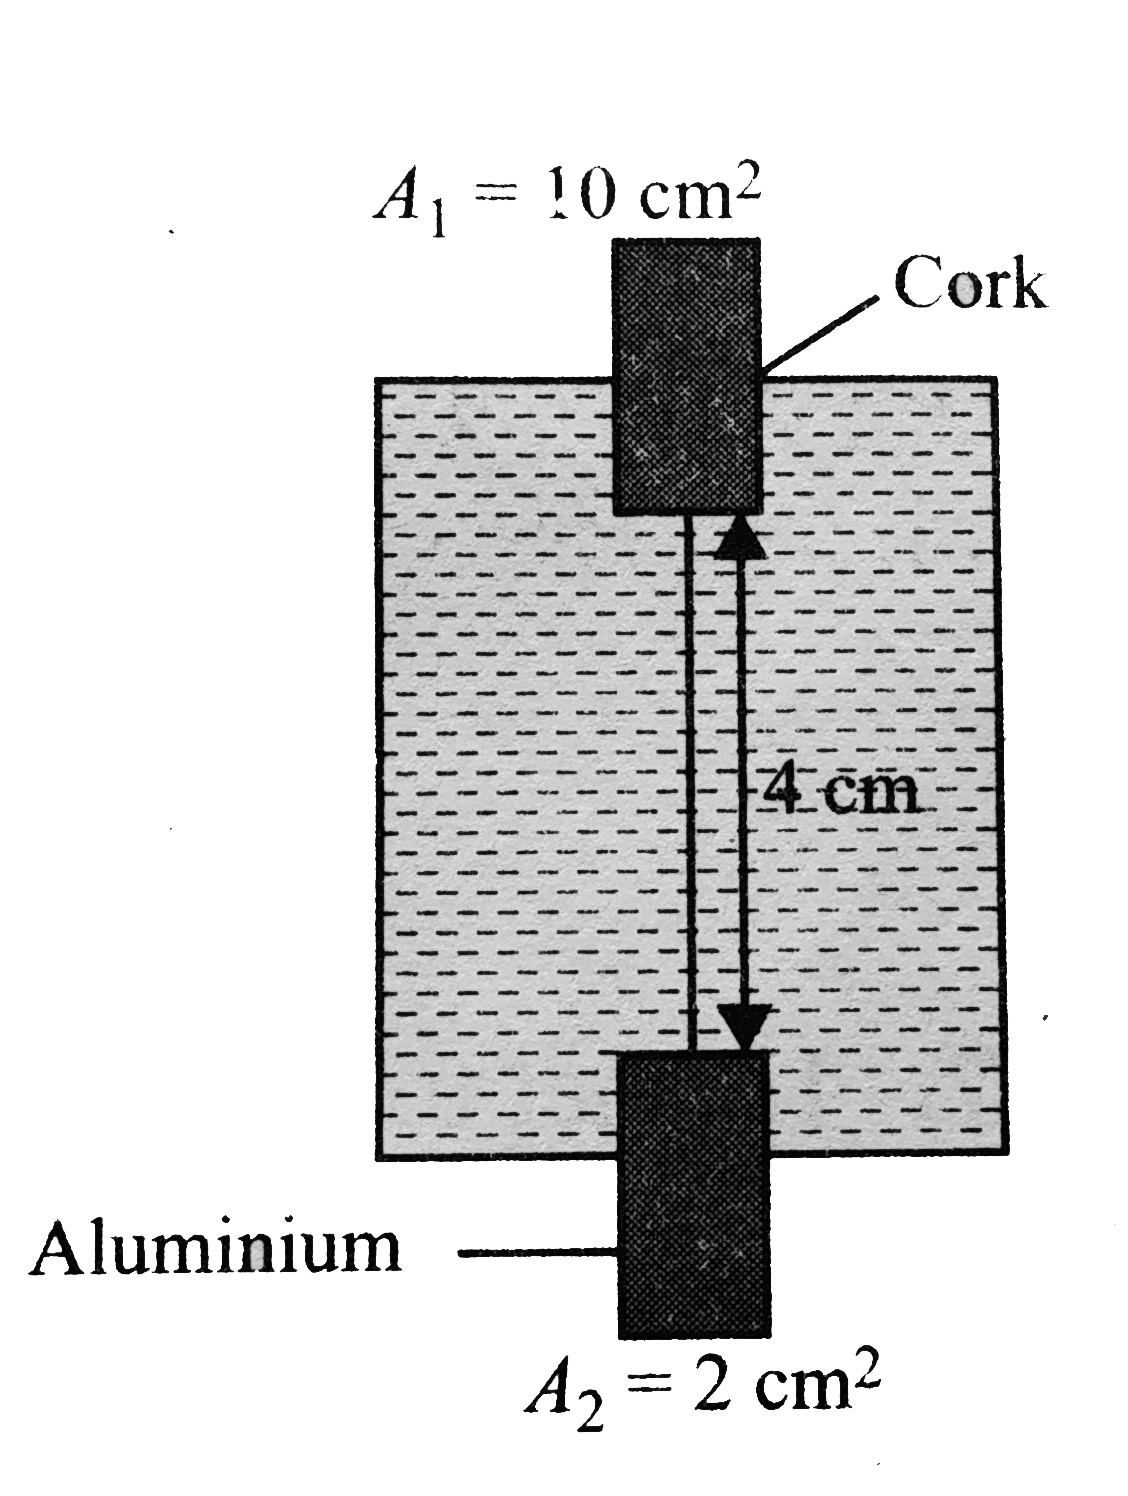 A cylindrical object of cork of mass 15 g and cross-sectional area A(1) = 10 cm^(2) floats in a pan of water as shown in the figure. An aluminum, cylinder of mass 25 g and cross-sectional area A(2) = 2 cm^(2) is attached 4 cm below the cork and slides through a watertight frictionless hole in the bottom of the pan. Take density of the cork, rho = 0.2 g//cm^(3), rho(